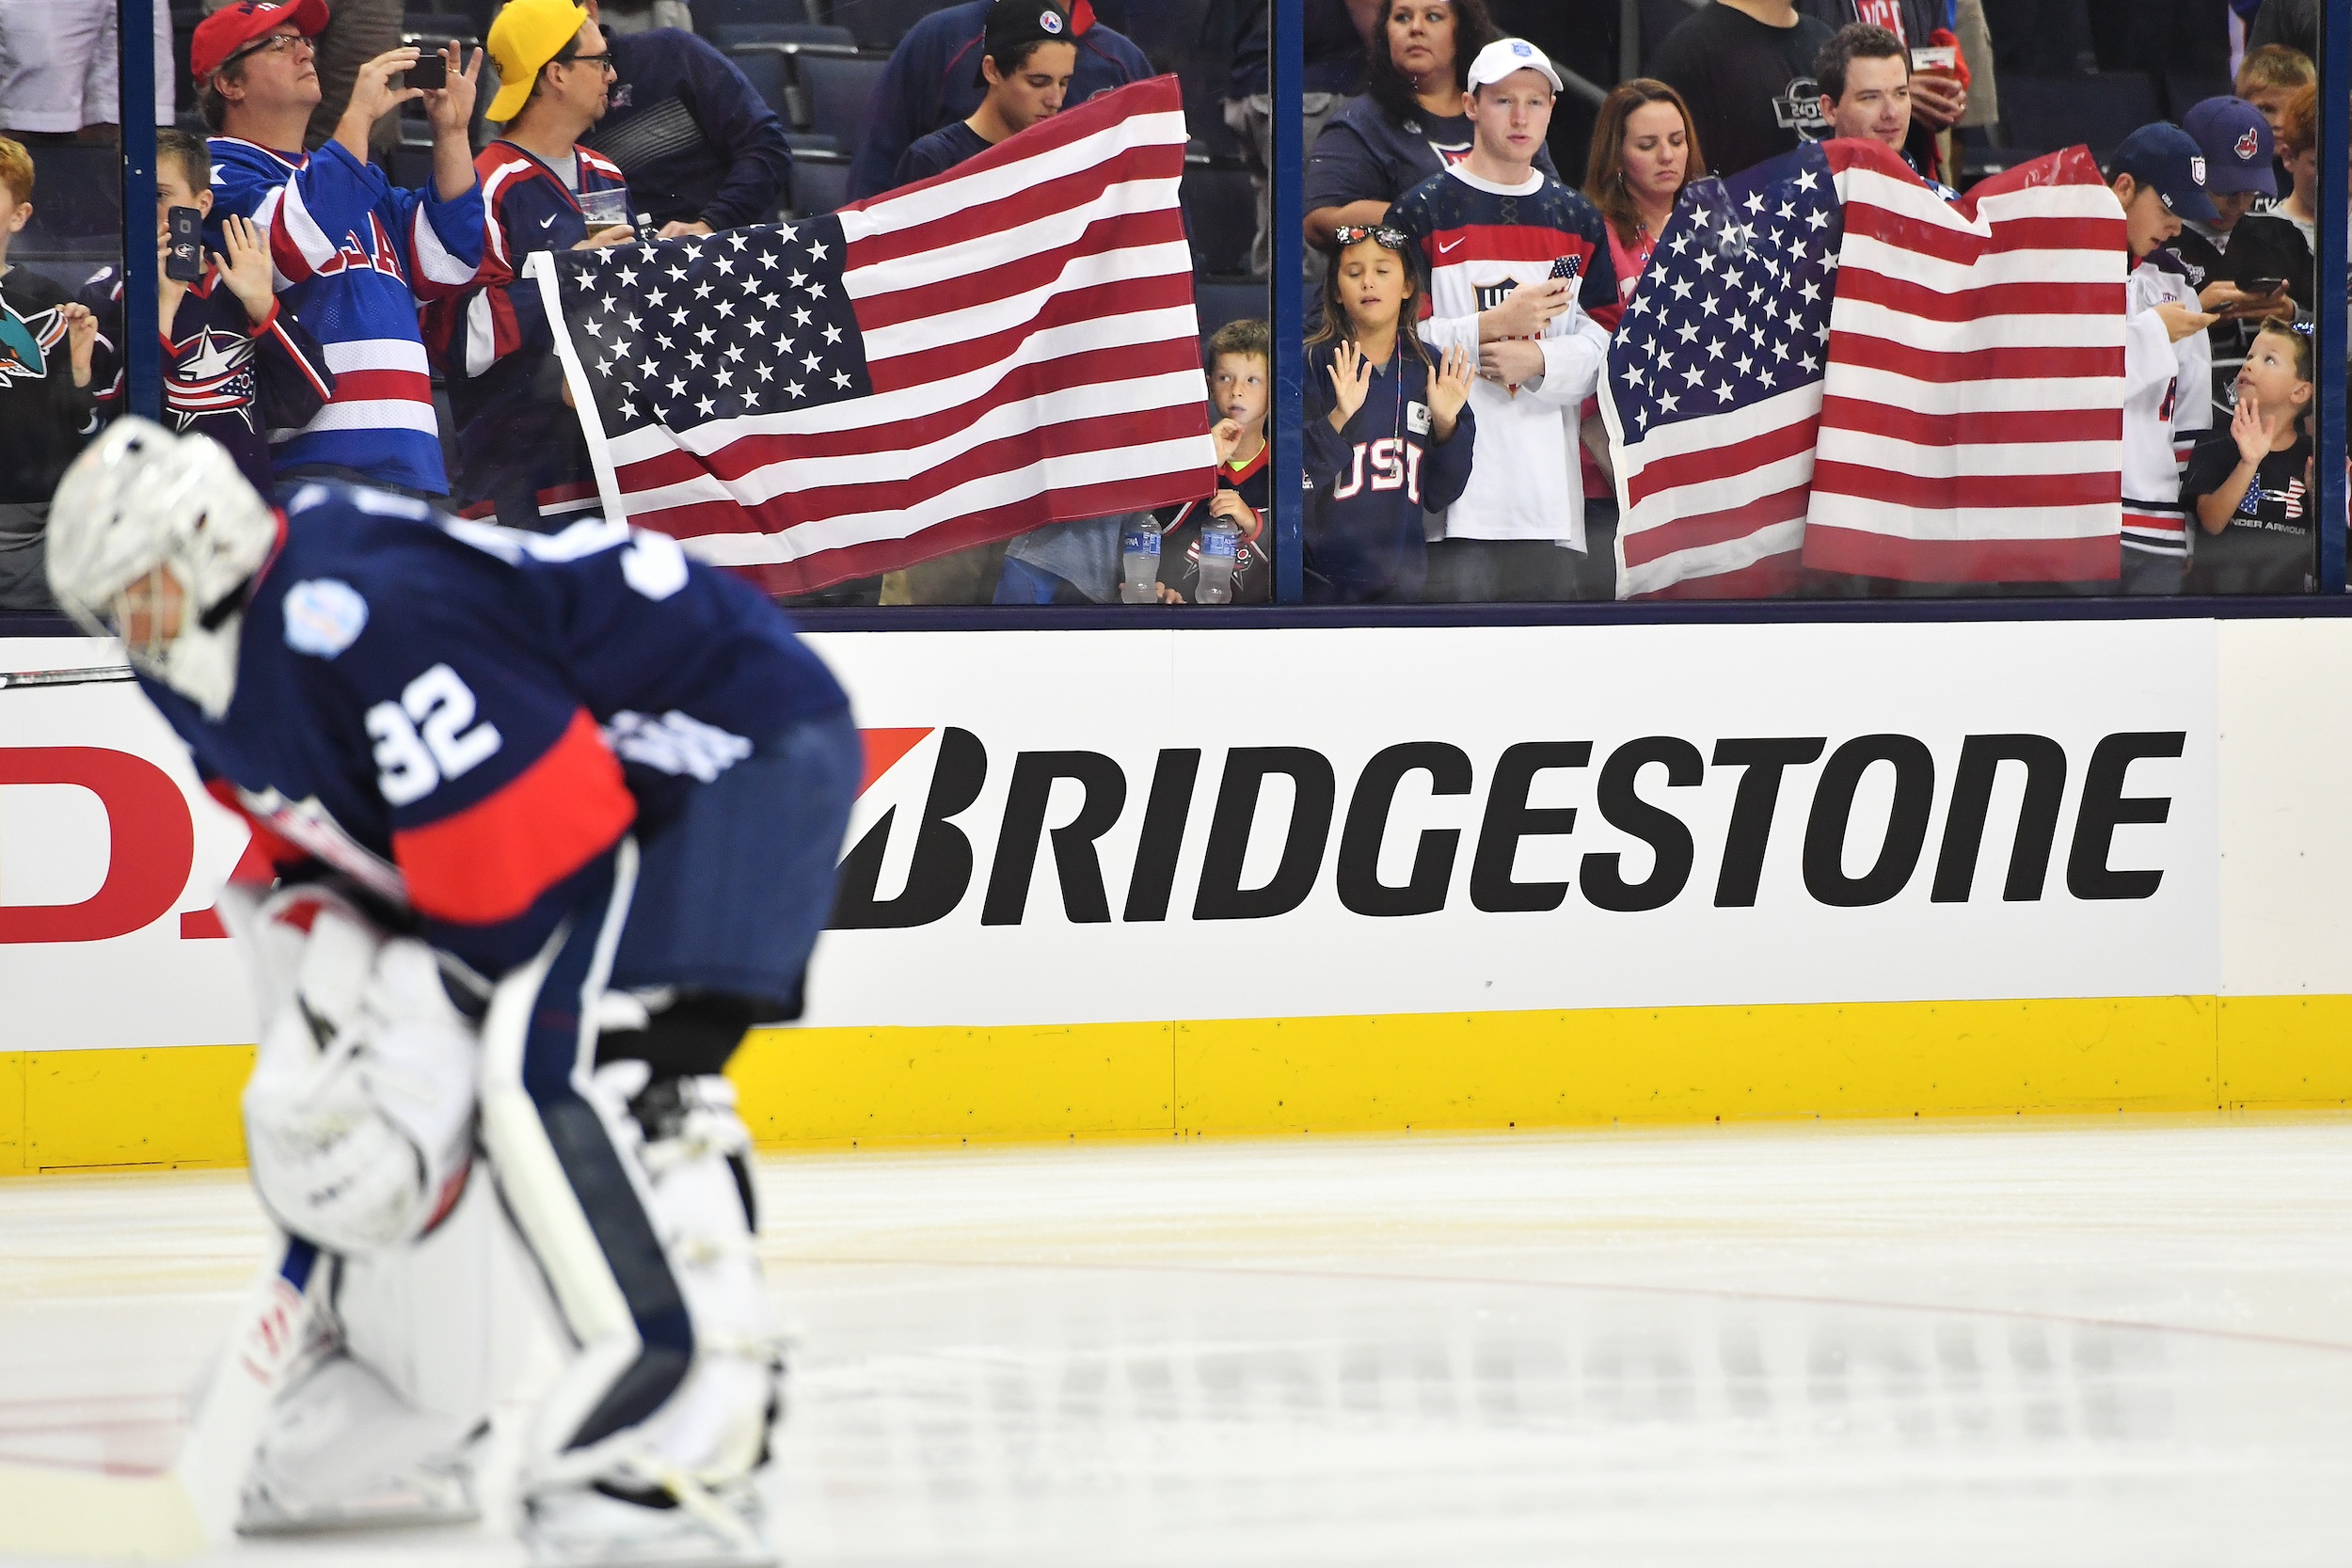 Fans display American flag during warmups prior to an exhibition game between Team USA and Team Canada on September 9, 2016 at Nationwide Arena in Columbus, Ohio. (Photo by Jamie Sabau/World Cup of Hockey via Getty Images)